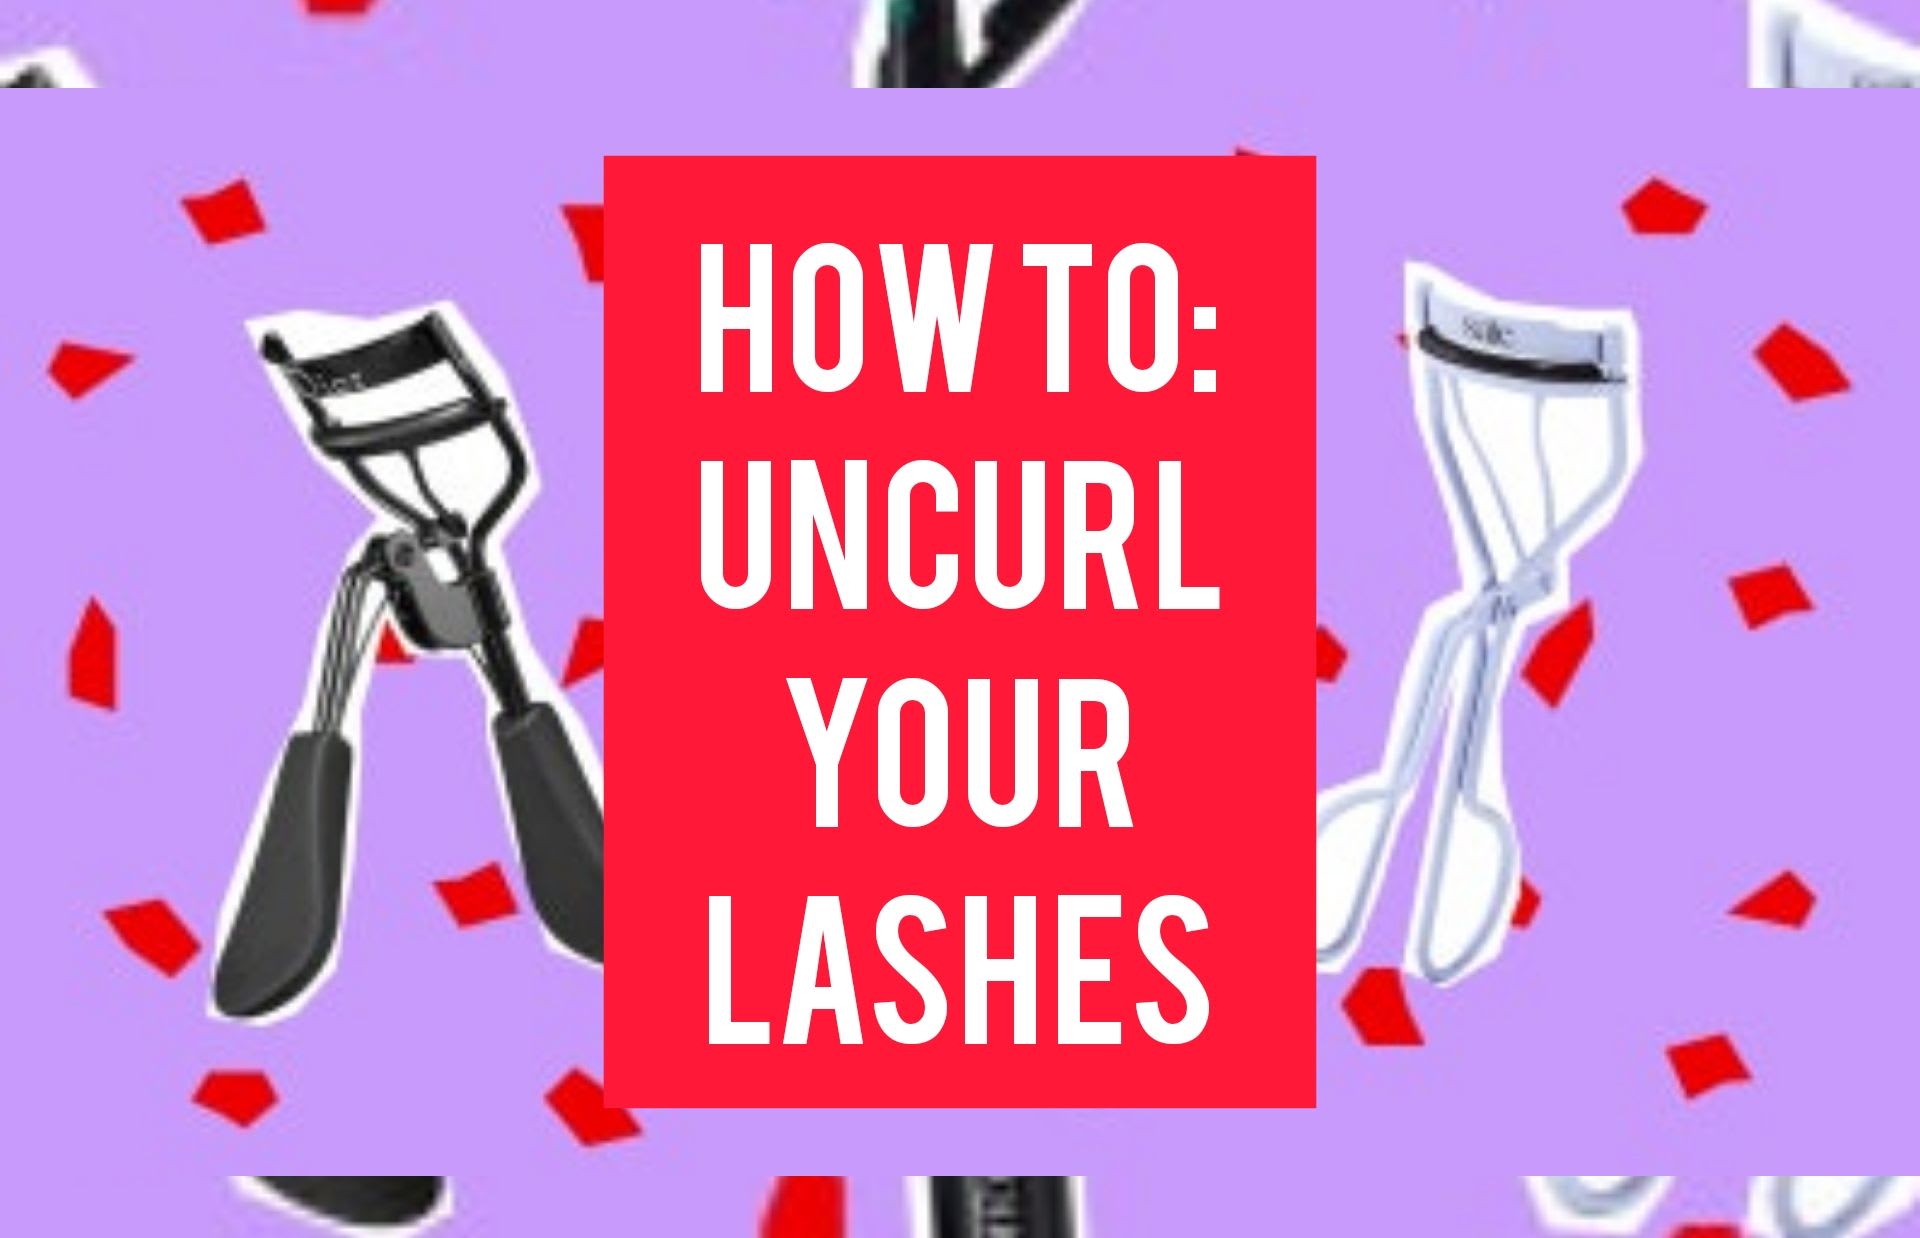 Uncurl lashes for easy faux application